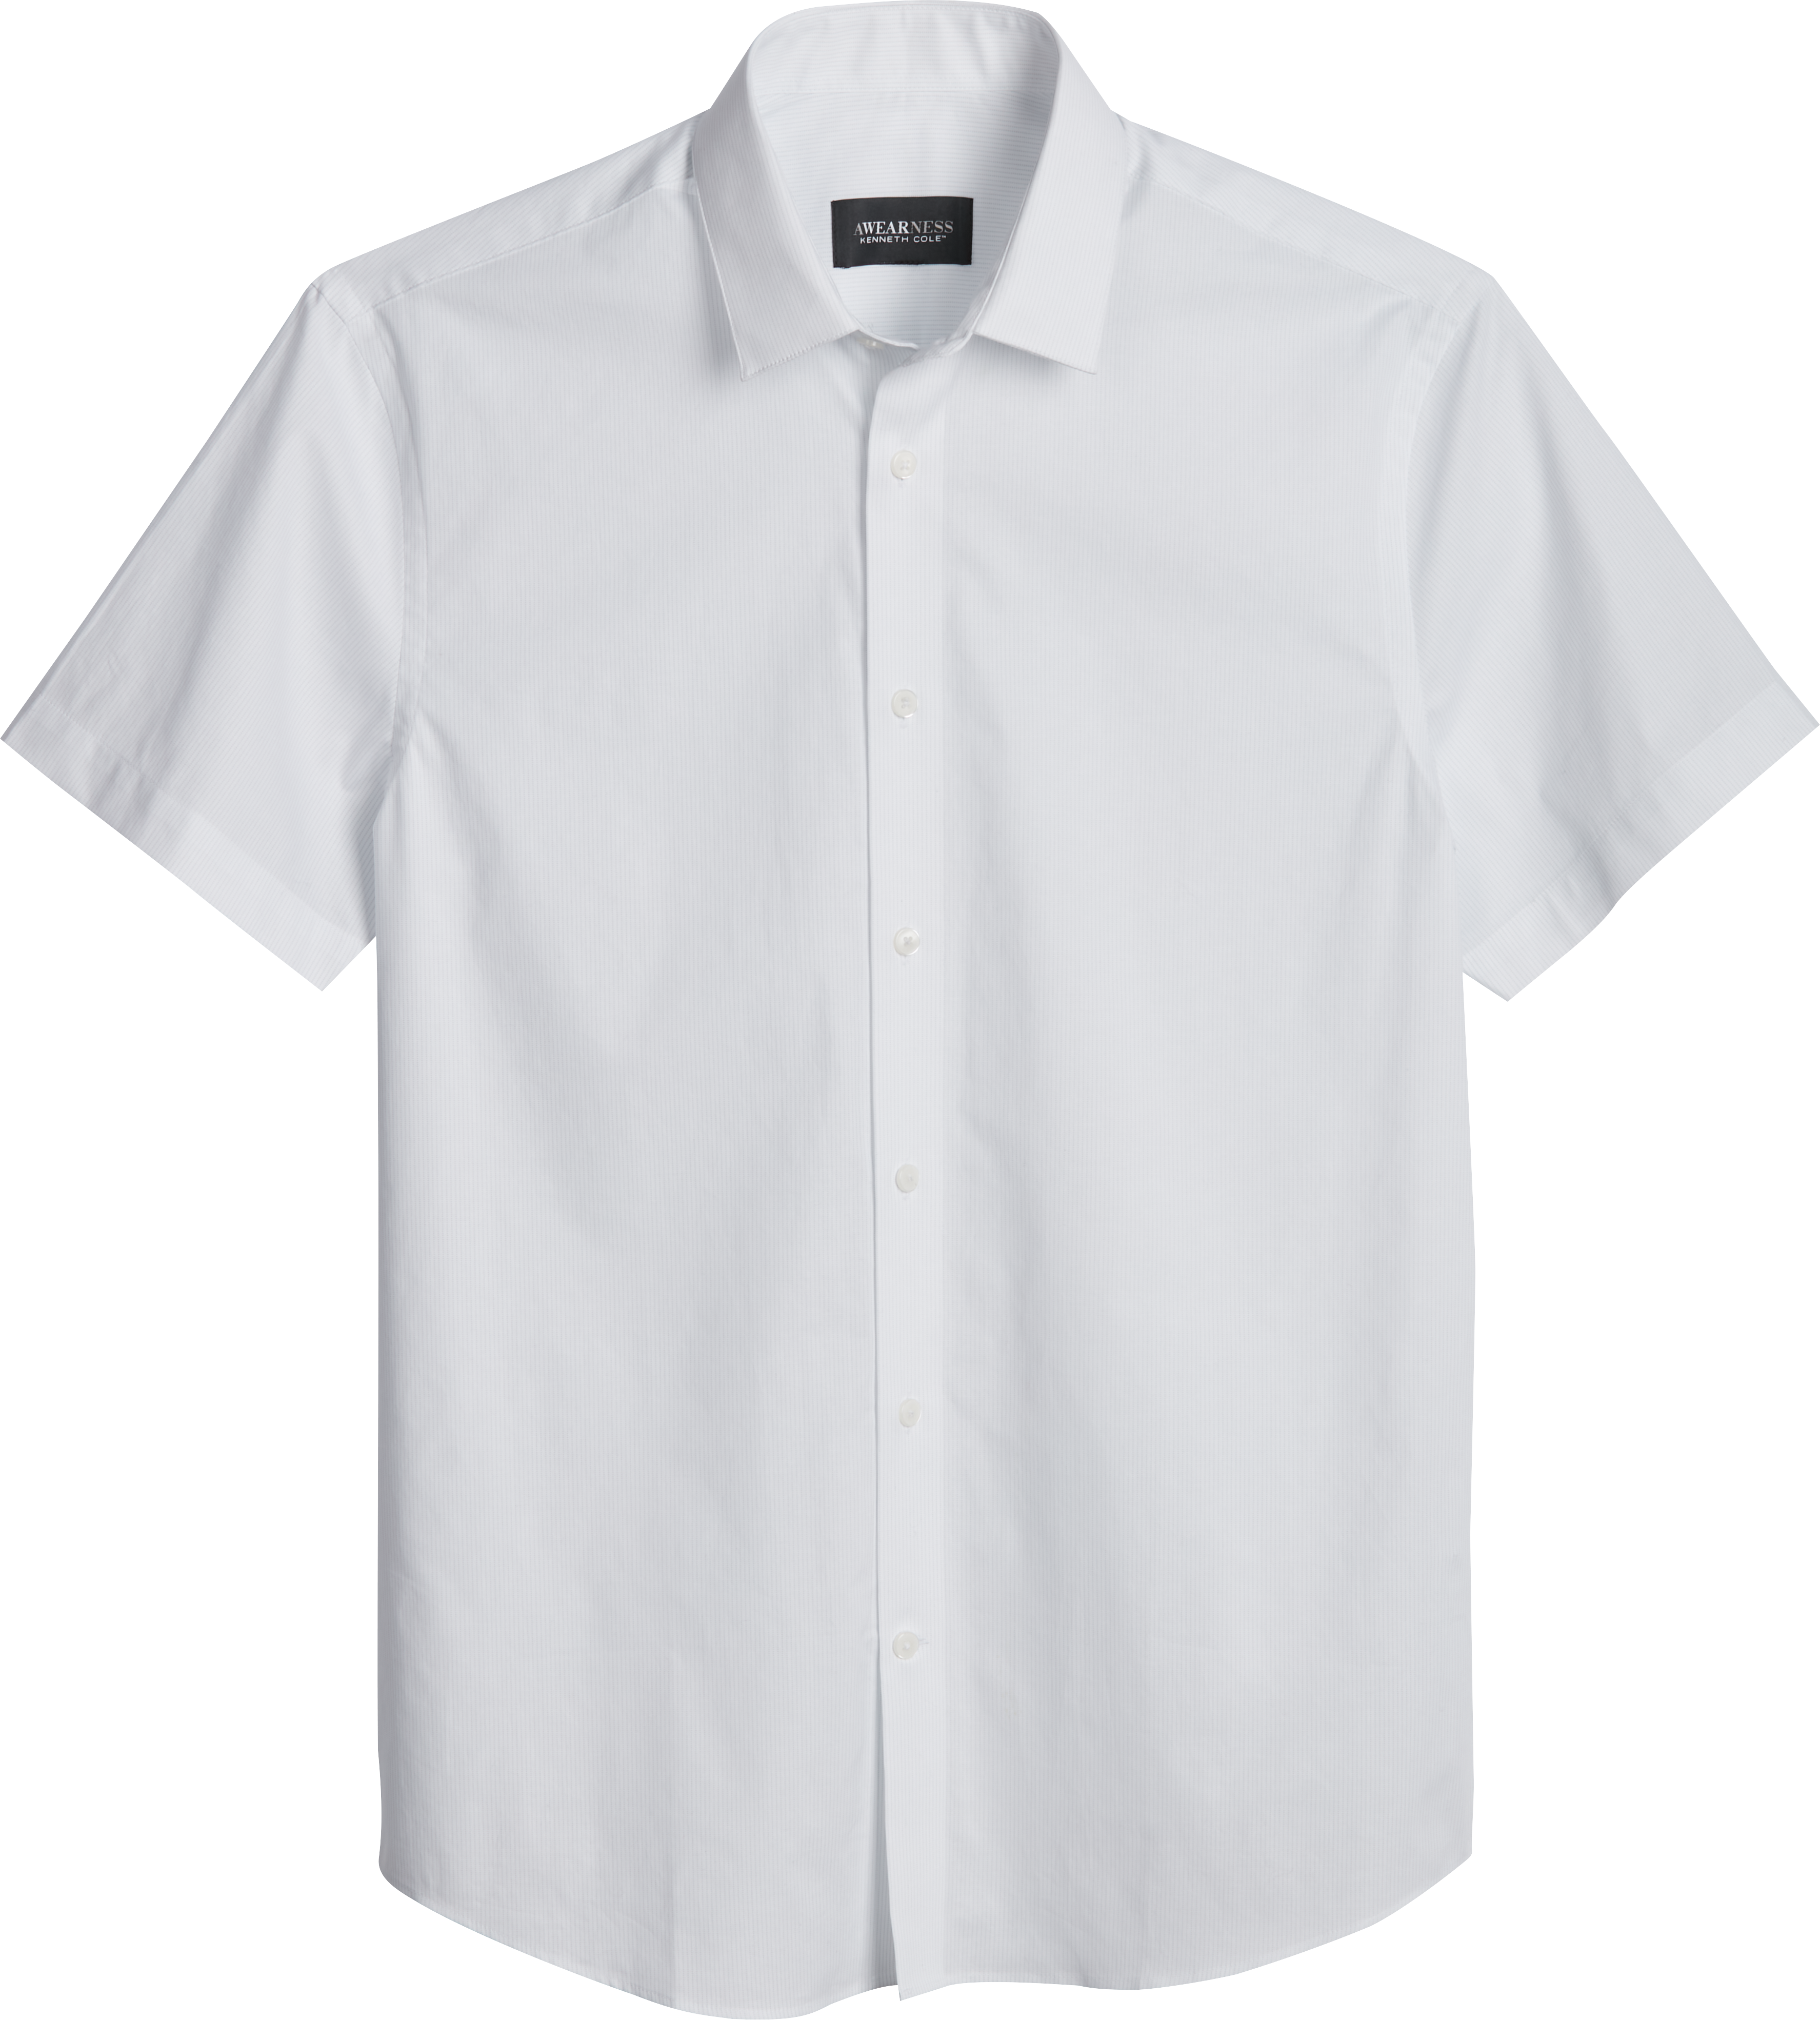 Awearness Kenneth Cole Slim Fit Short Sleeve Casual Shirt